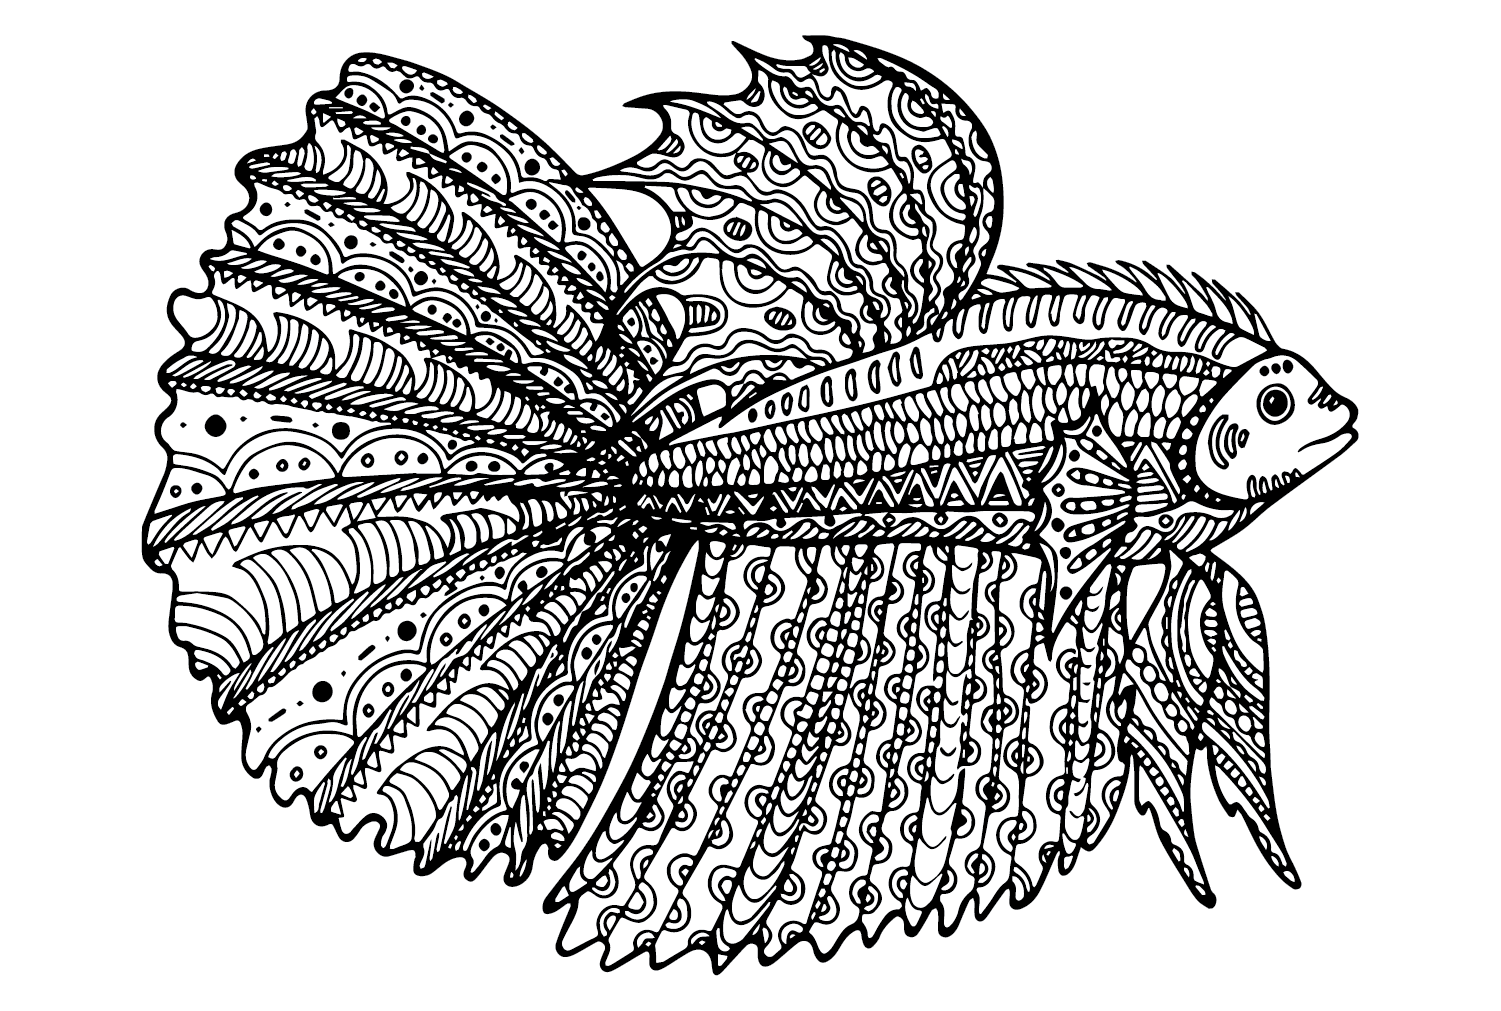 Betta Fish Hand Drawn Coloring Page - Free Printable Coloring Pages